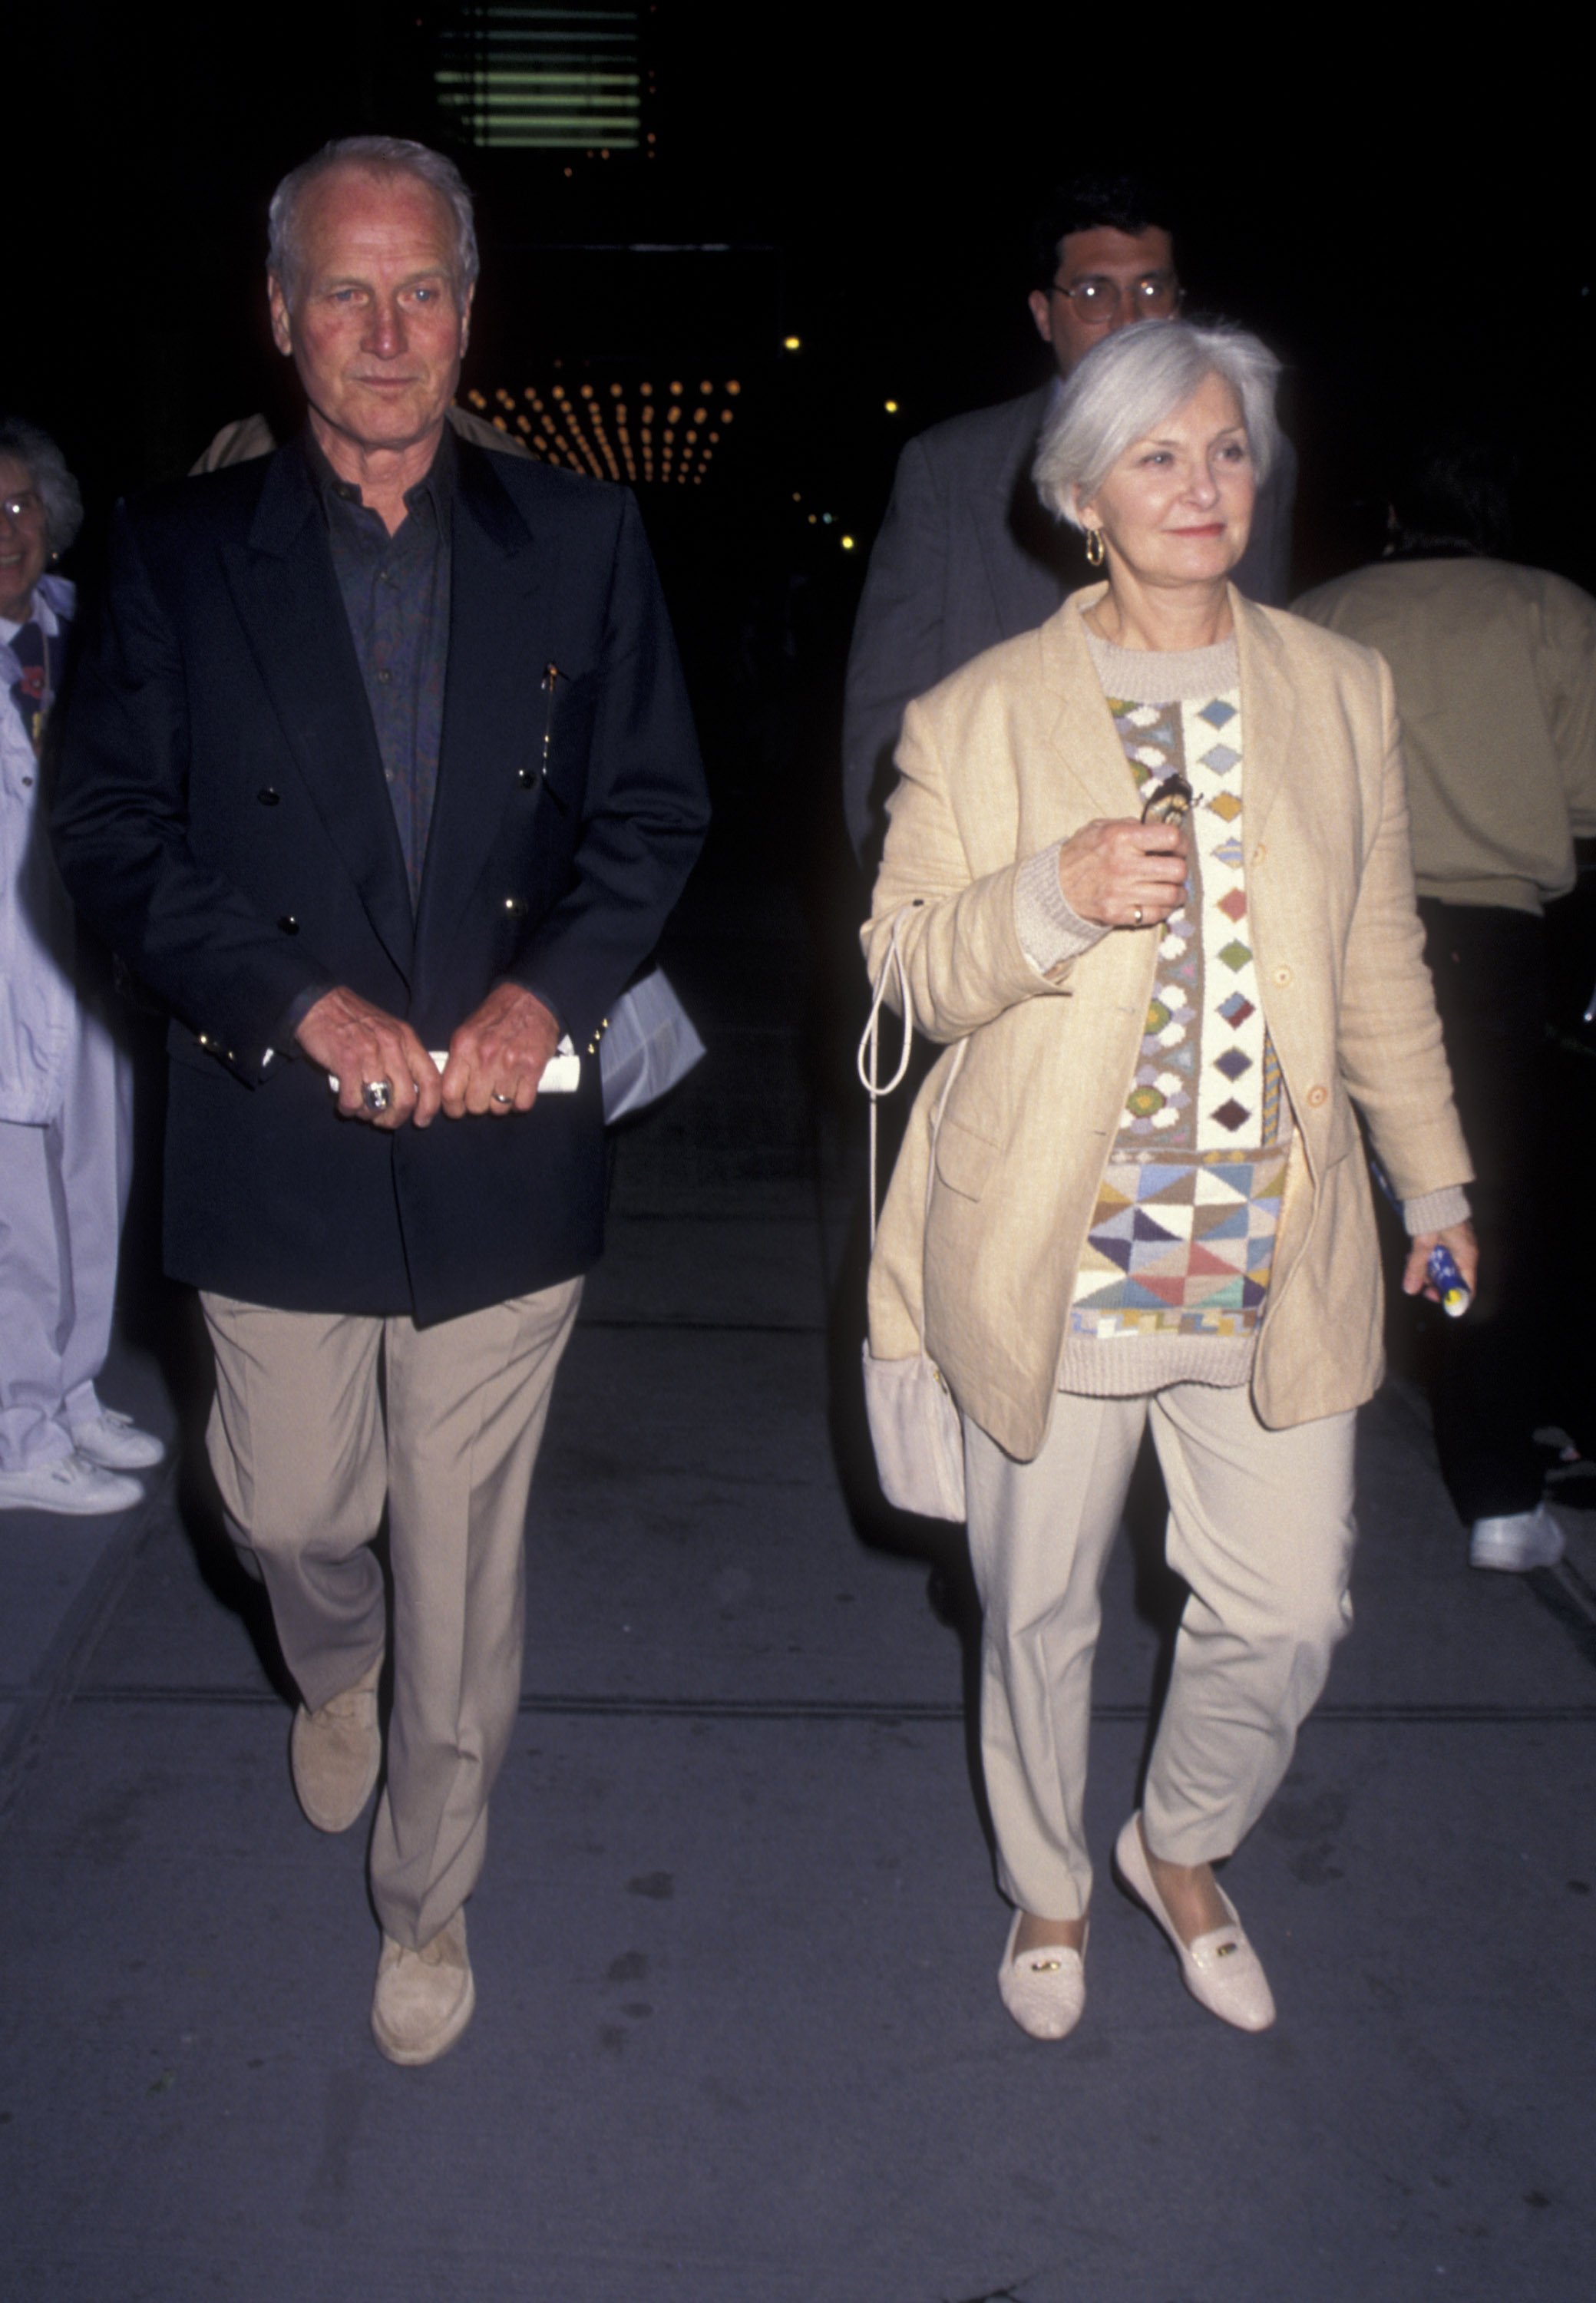 Paul Newman and Joanne Woodward attend the performance of "Rent" at the Nederlander Theater on May 30, 1996, in New York City. | Source: Getty Images